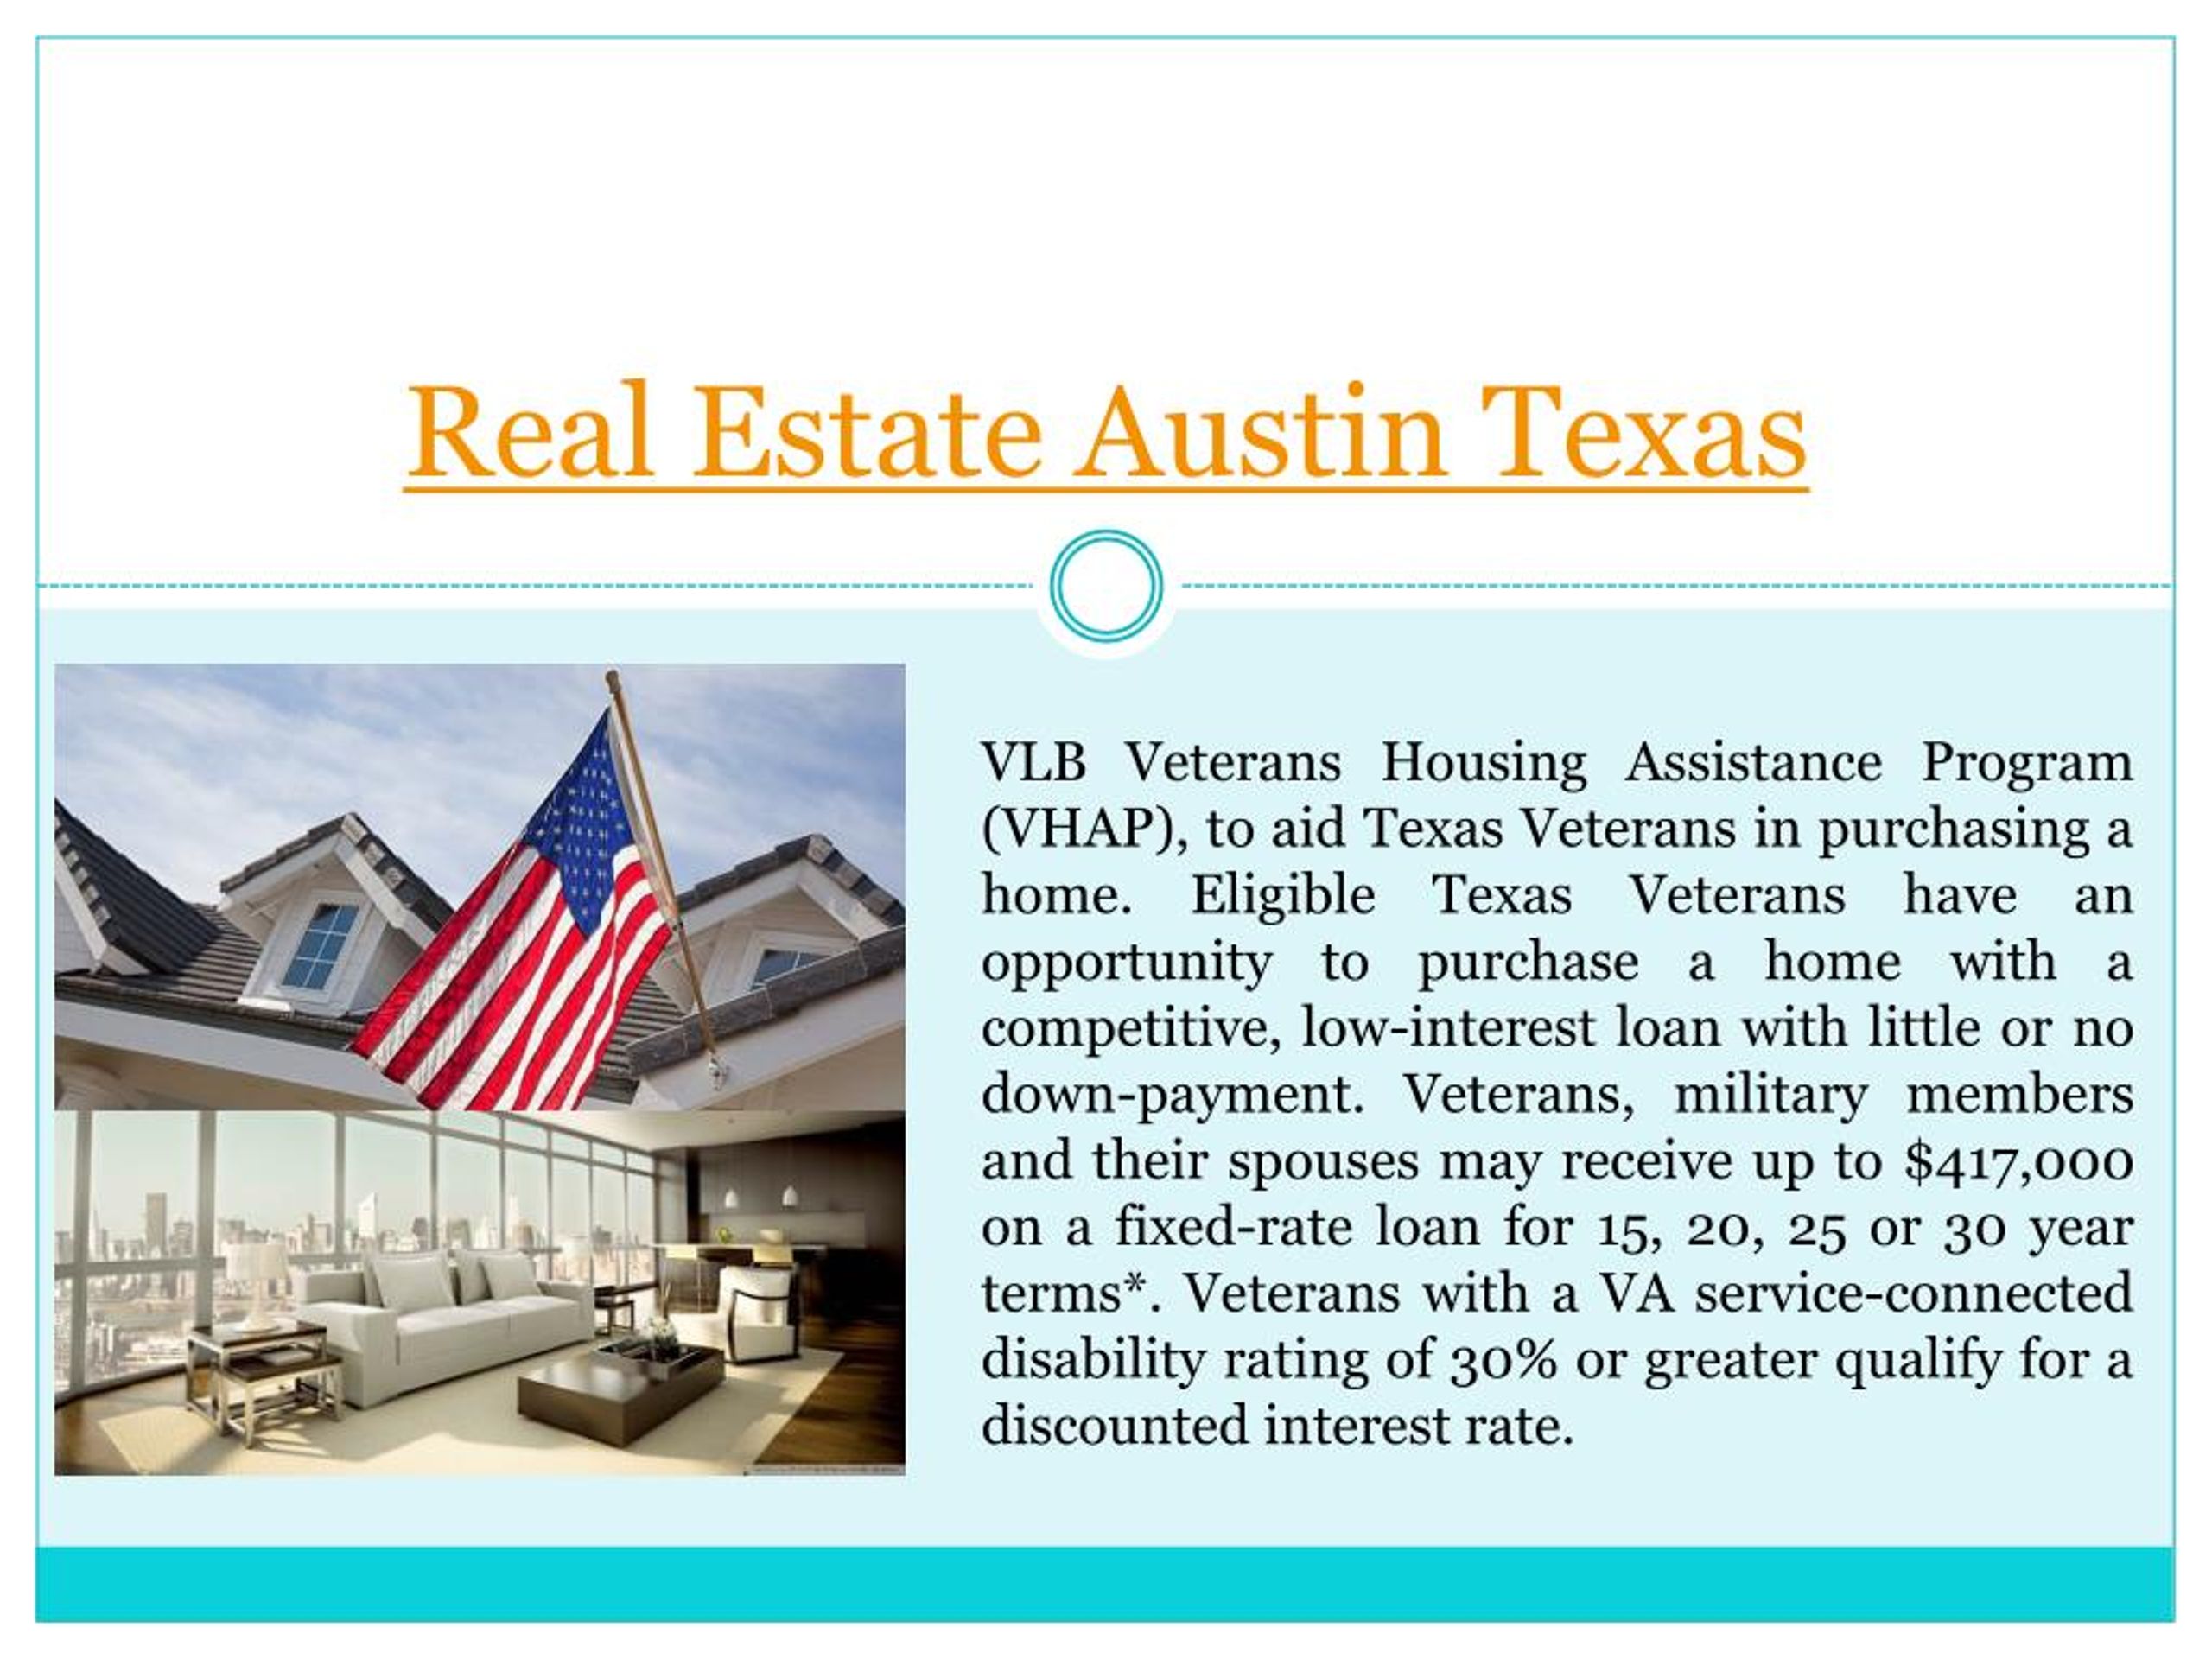 PPT Texas Veterans Home Loans PowerPoint Presentation, free download ID7416061